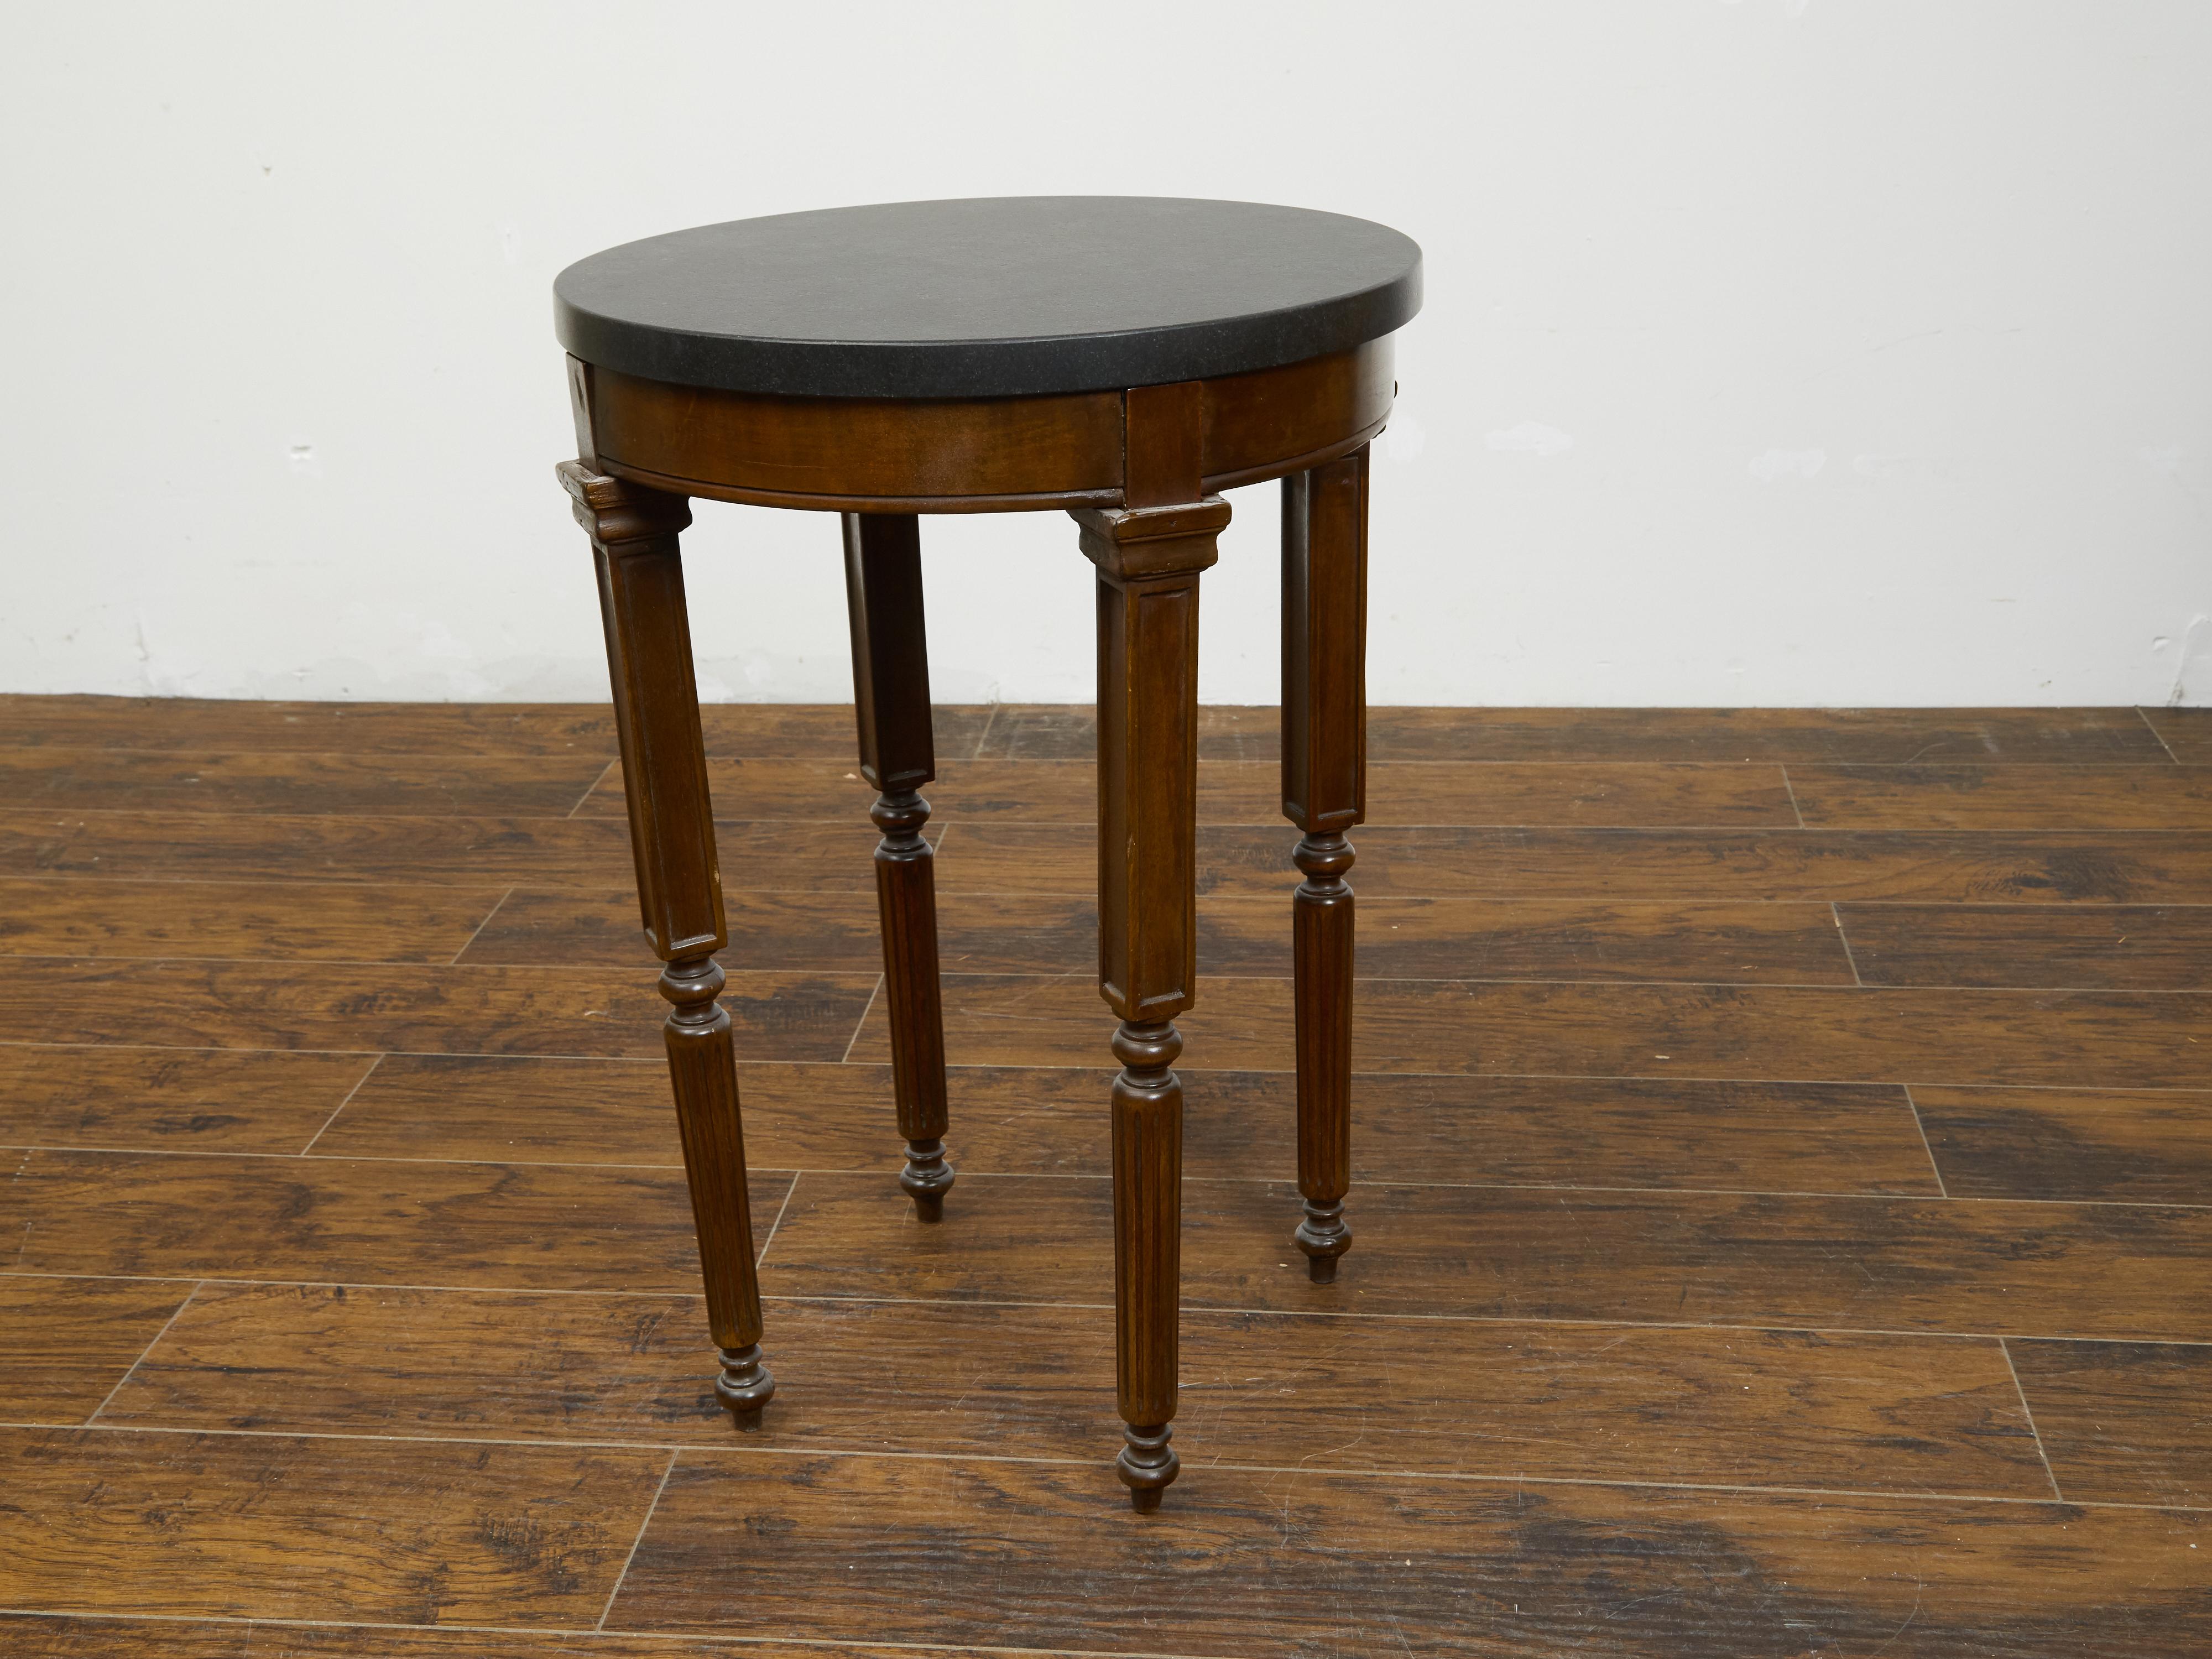 French 19th Century Wooden Guéridon Table with Circular Black Marble Top For Sale 6